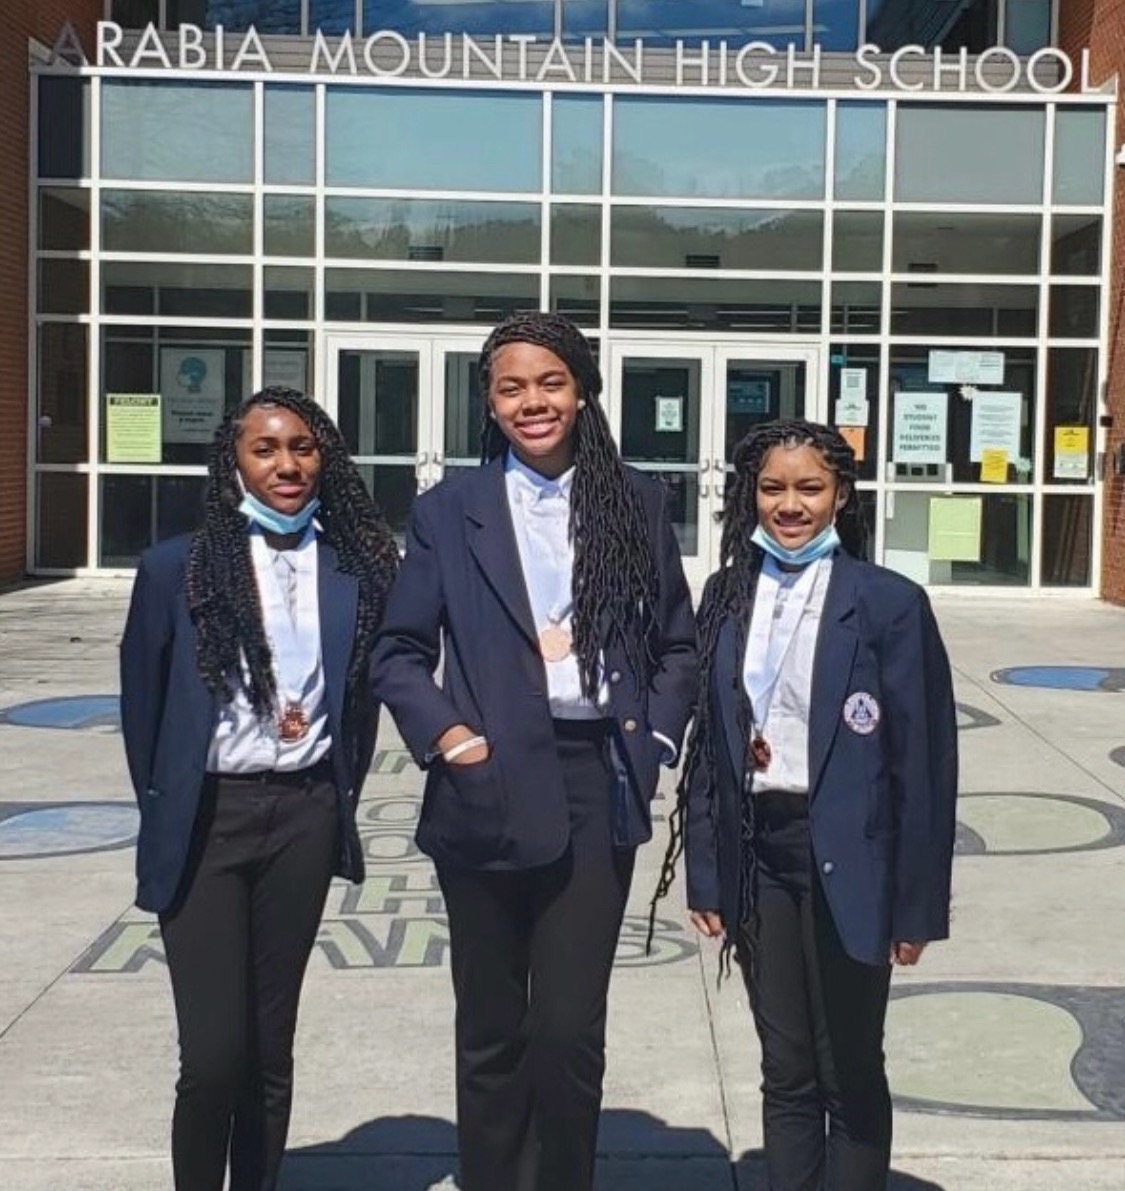 Ending off #CSEdWeek with a big shoutout to Arabia Mountain High School's 2023 Congressional App Challenge winners! Their groundbreaking mobile app, Telepsy, is a game-changer for epilepsy care—innovation at its finest! Fantastic job to the talented team for a job well done!